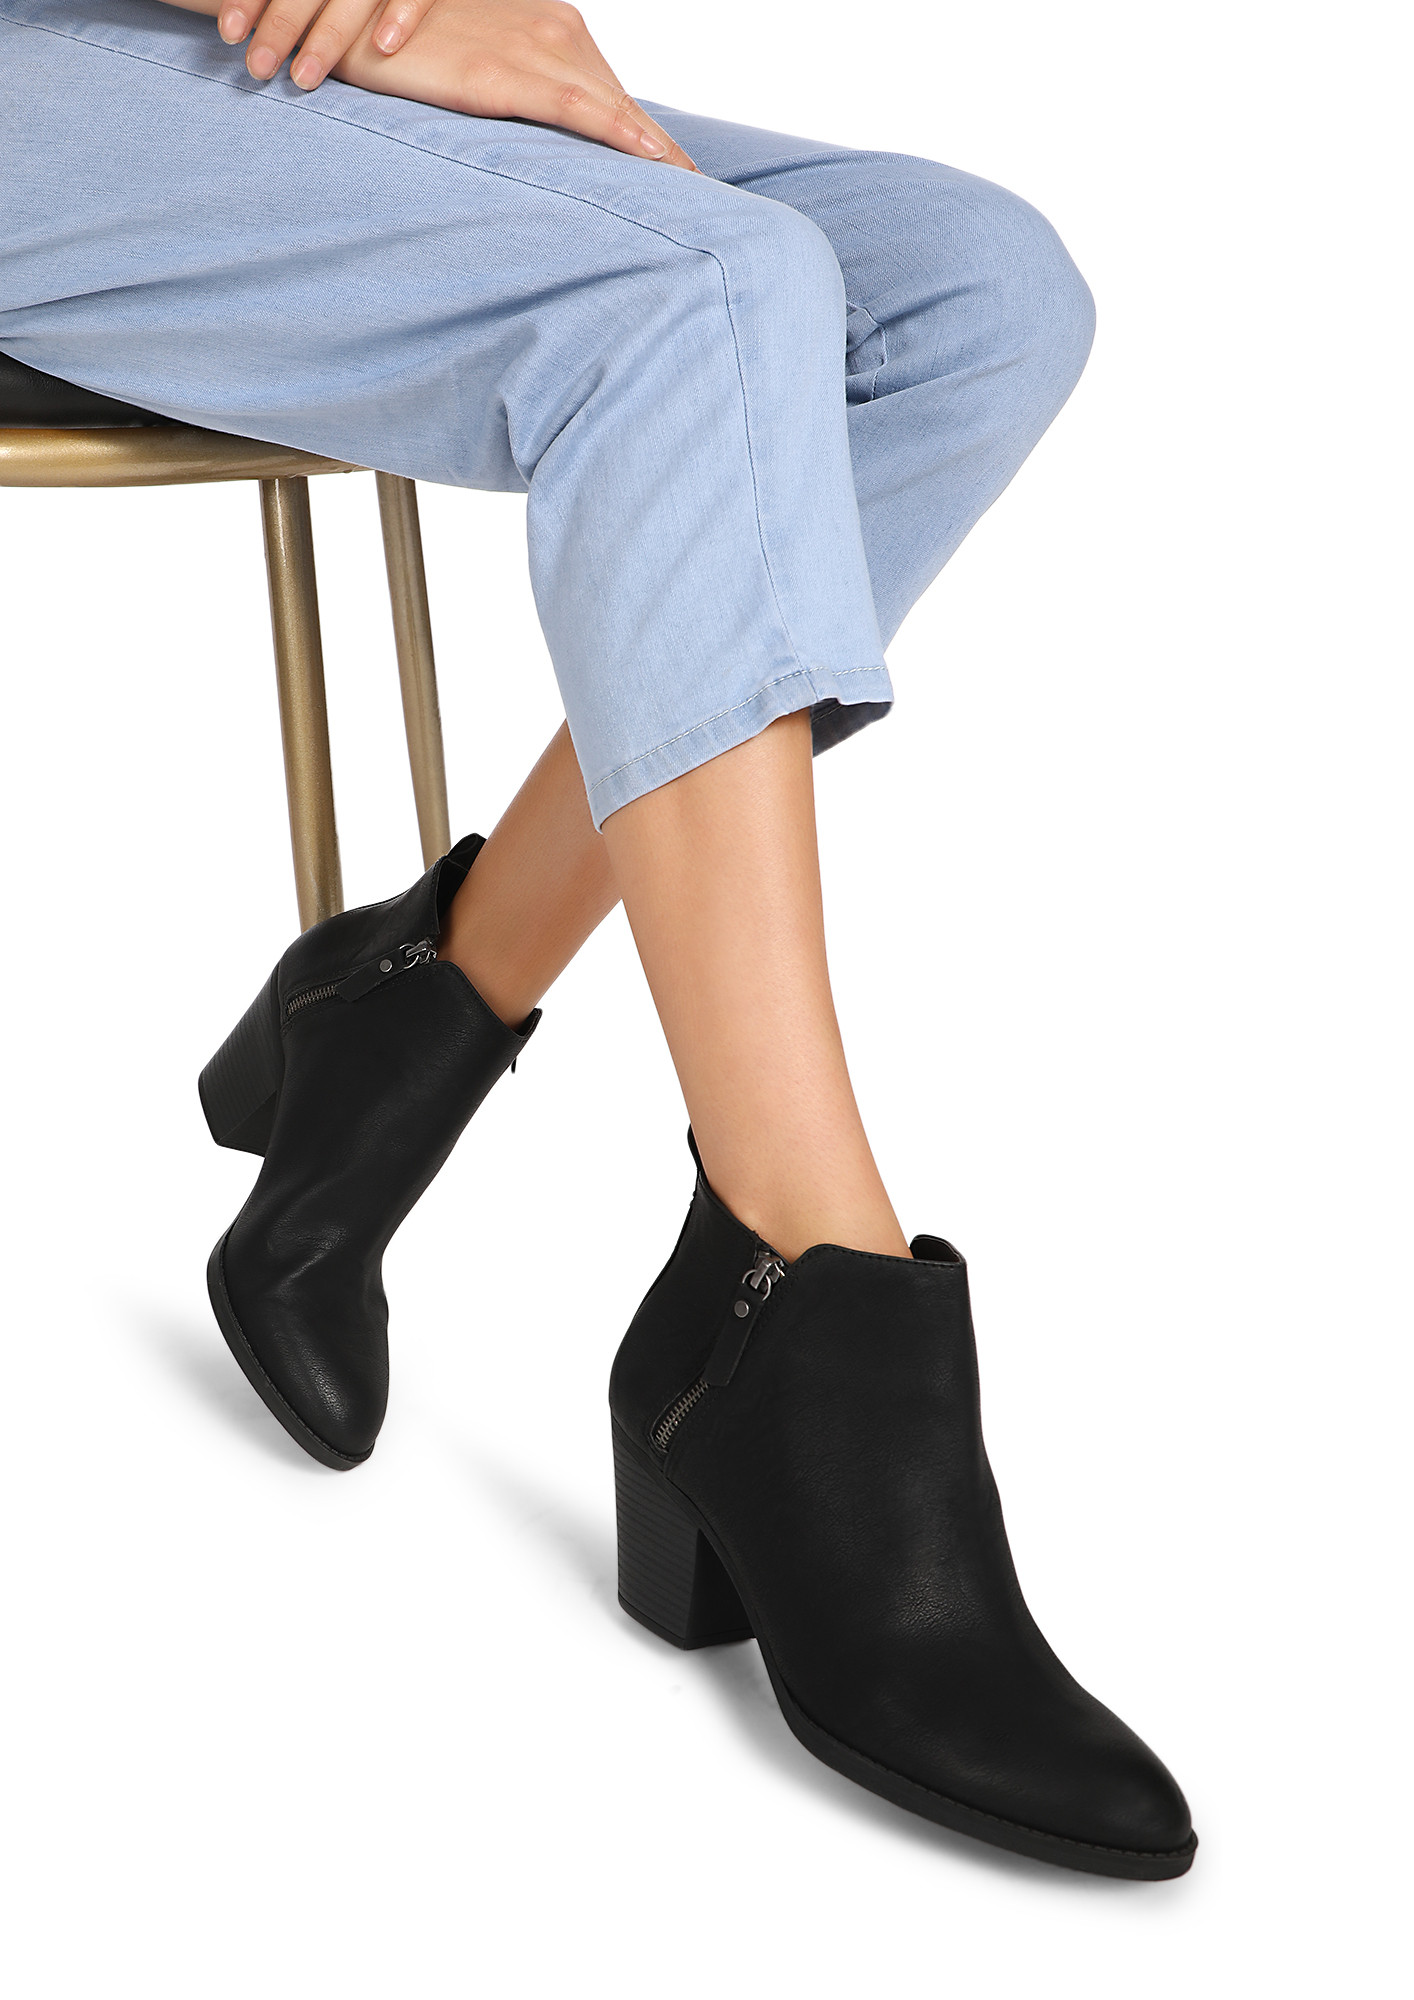 WHATTA CLASSIC BLACK ANKLE BOOTS